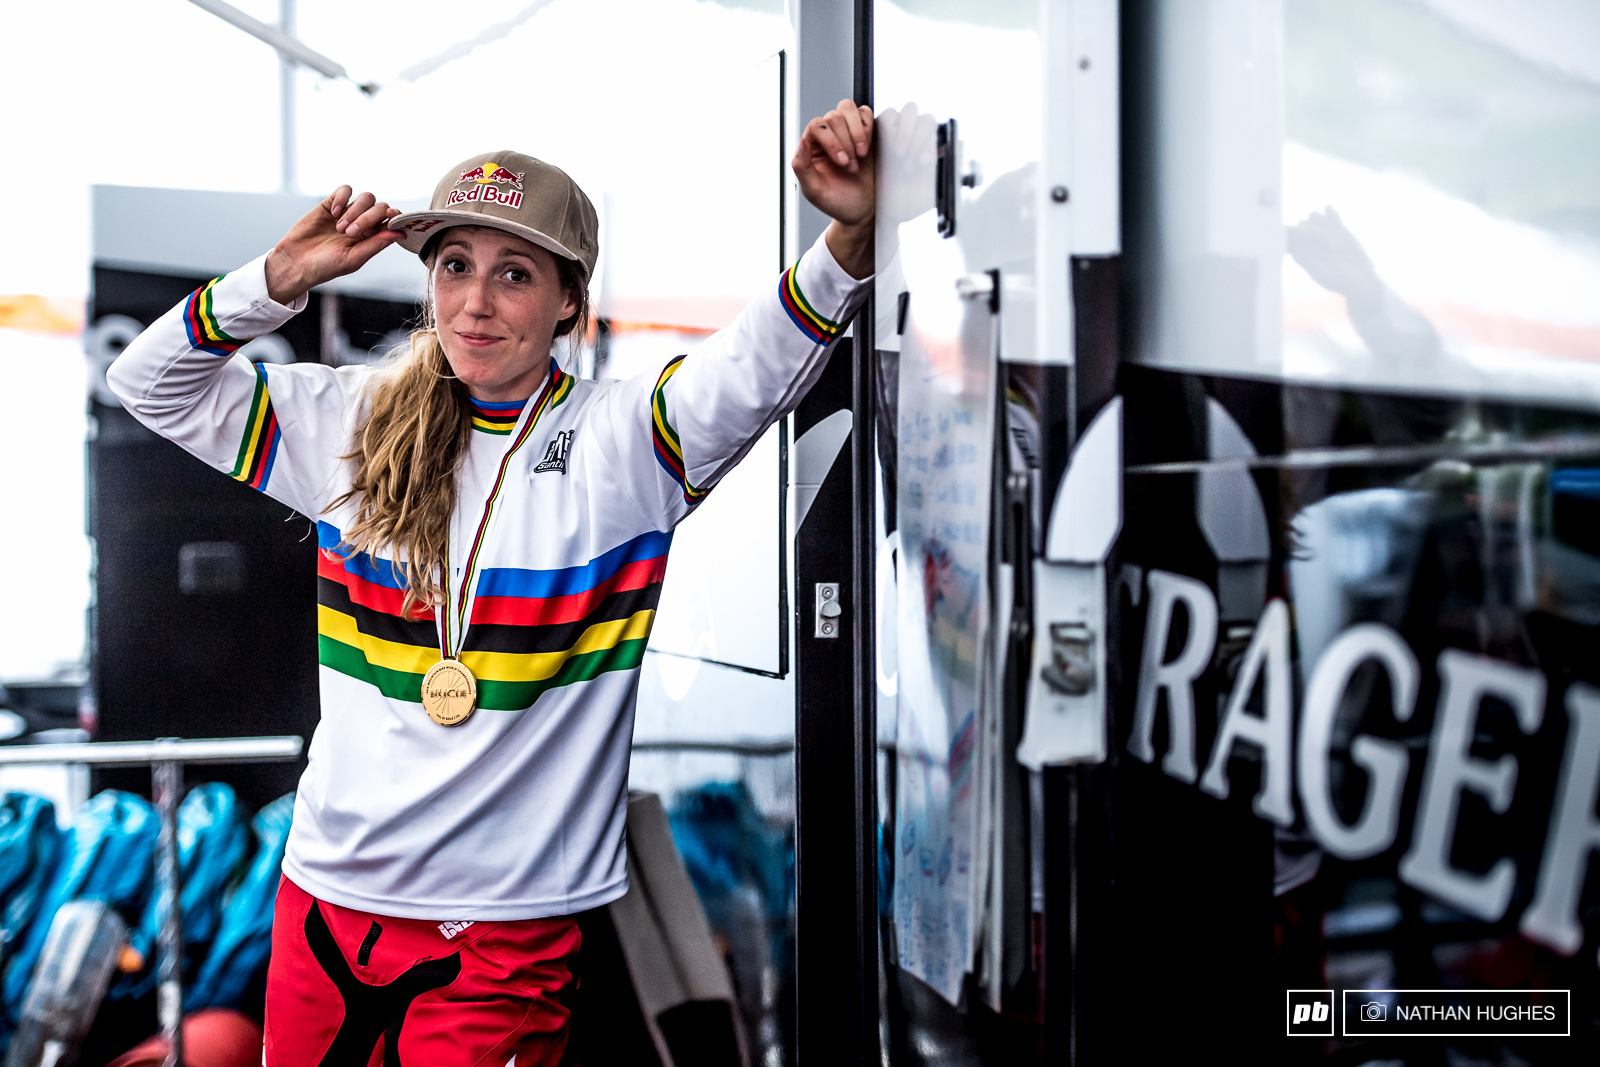 Tip of the hat to 4 gold medals and the perfect season. Congratulations to the unstoppable Rachel Atherton from all Pinkbike 